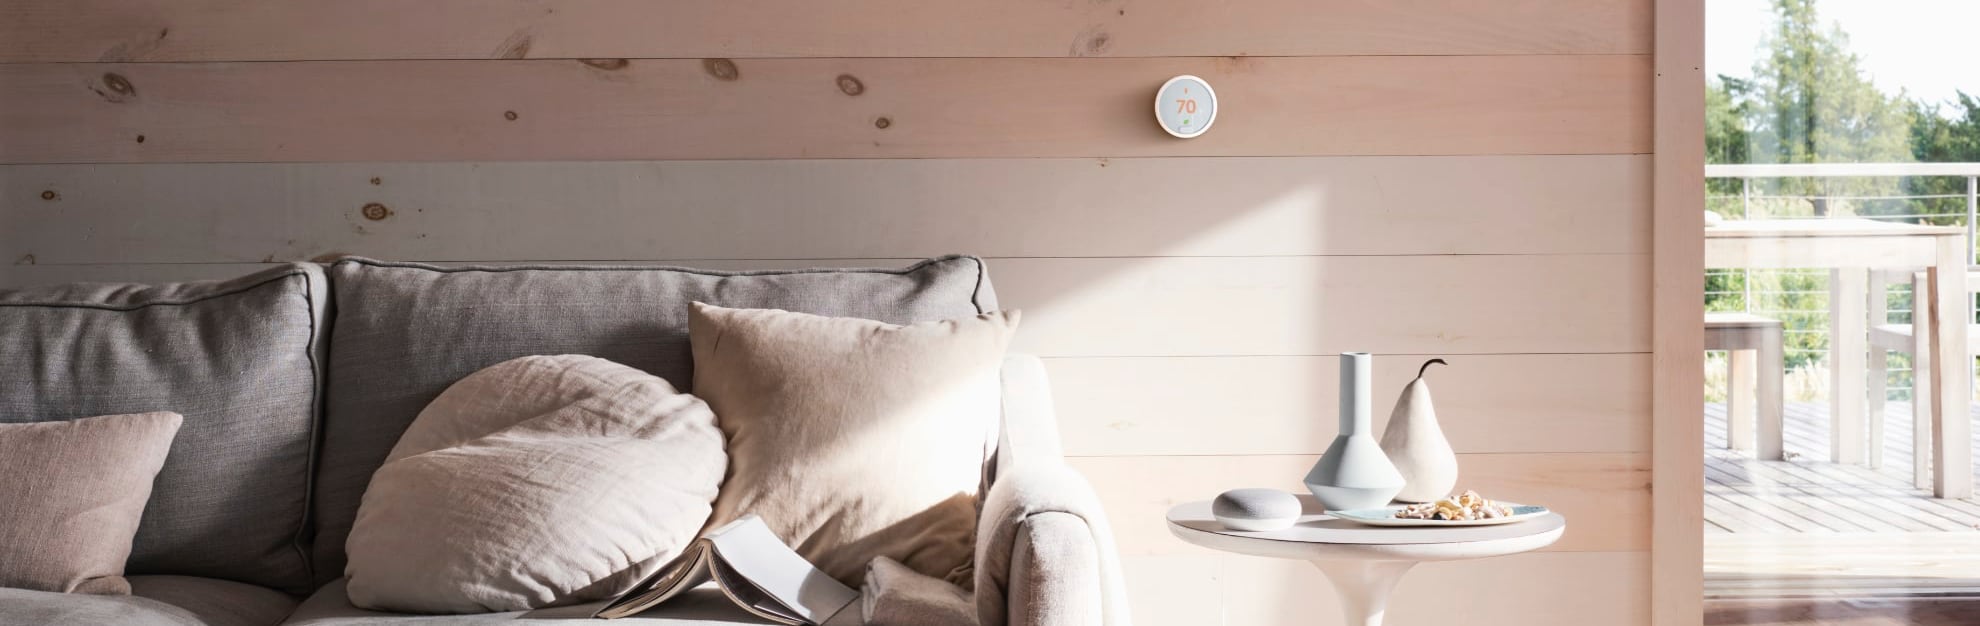 Vivint Home Automation in Peoria